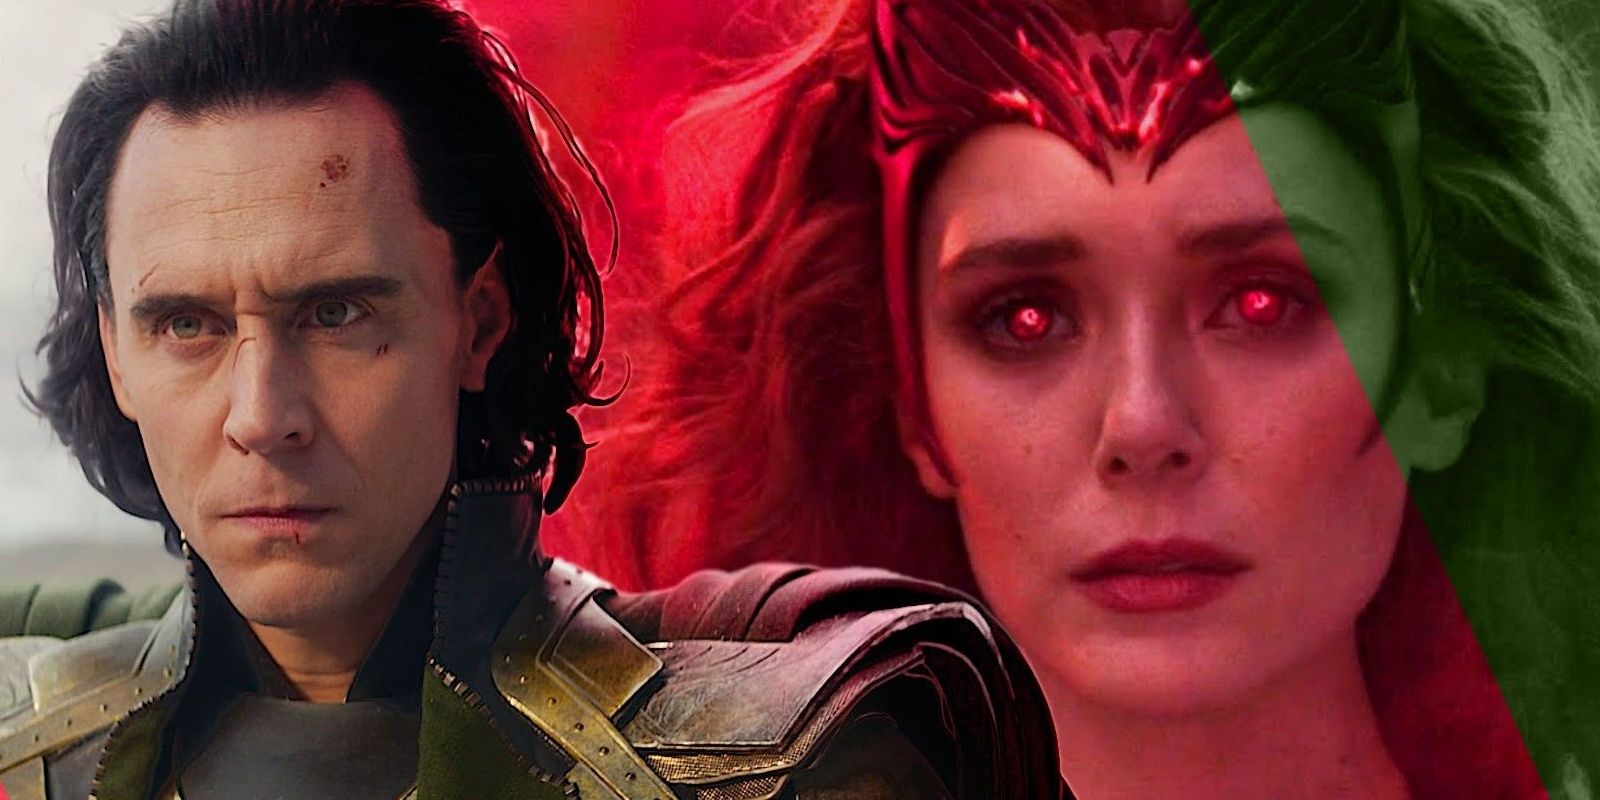 Loki from his series next to Wanda from her series